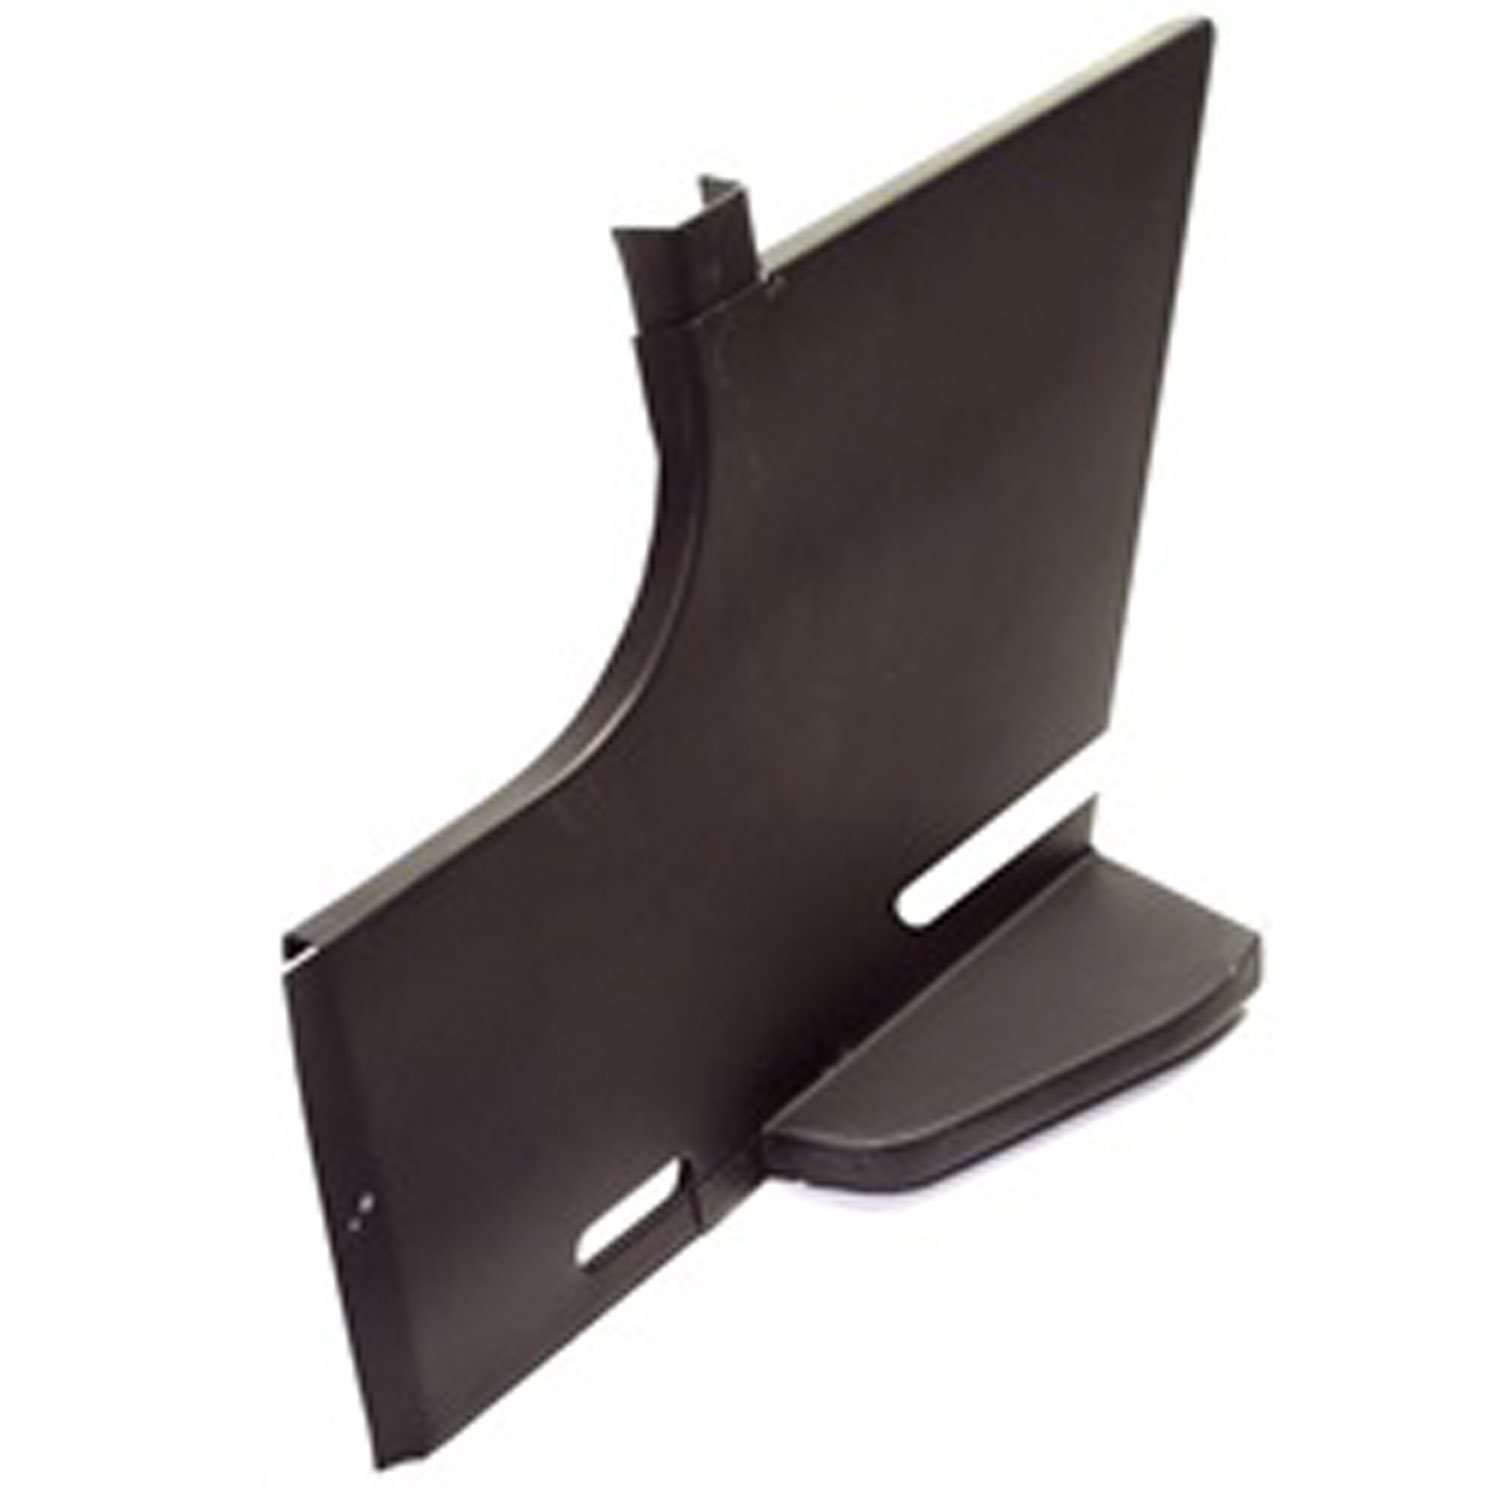 This right cowl side panel from Omix-ADA fits 46-53 Willys CJ2A and CJ3A and includes the step.